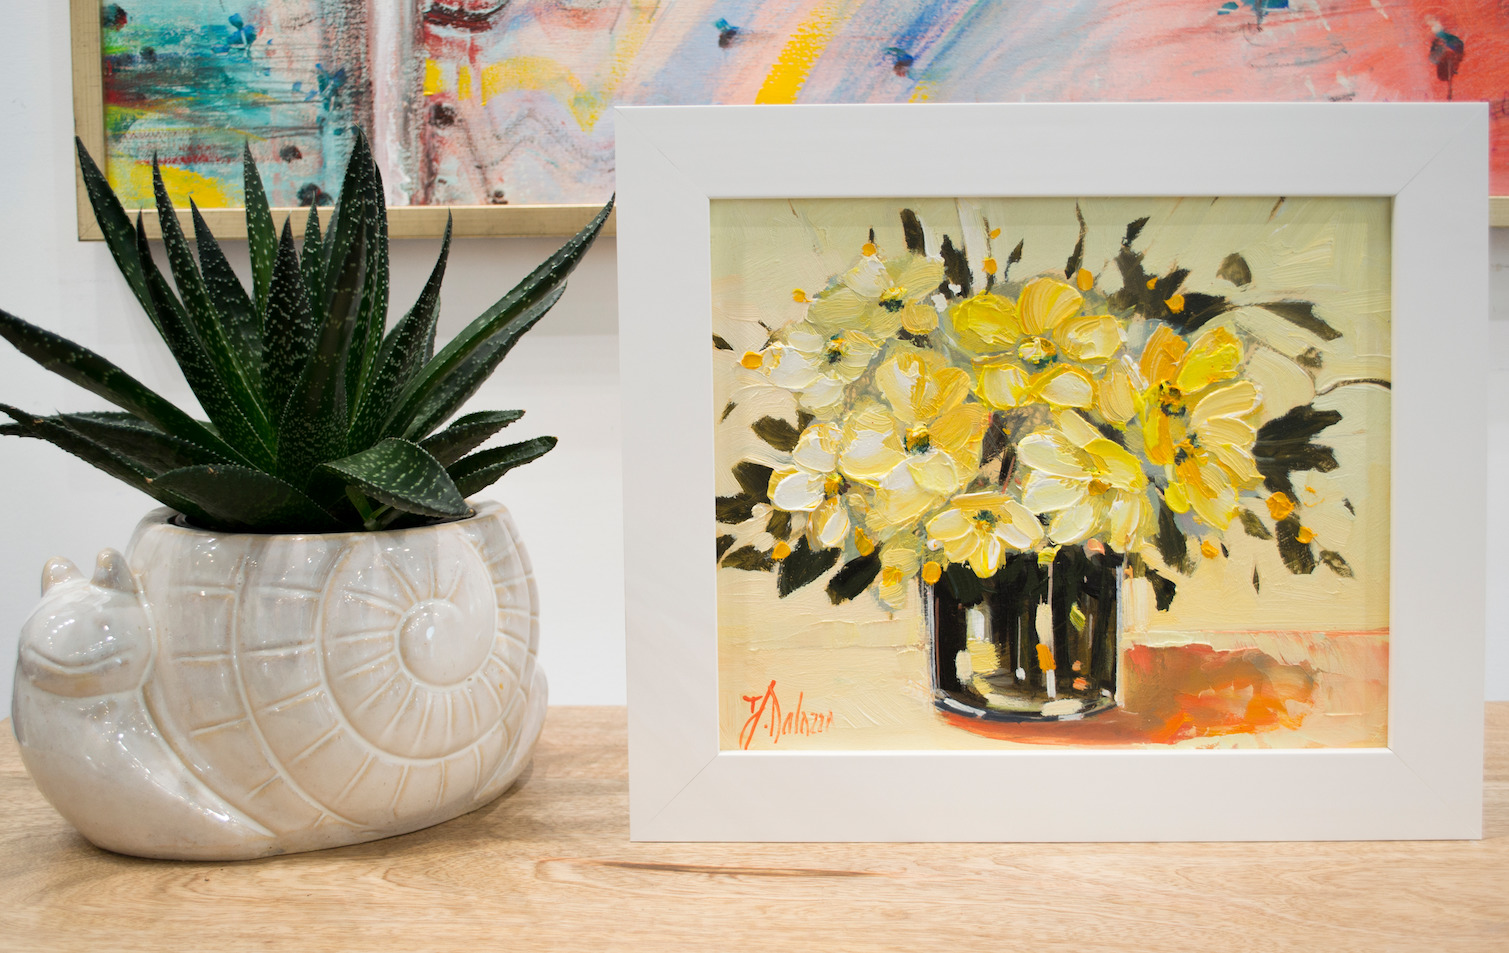 Wall Design Ideas With Still Life Painting "A Little Bit of Sunshine" By Judith Dalozzo